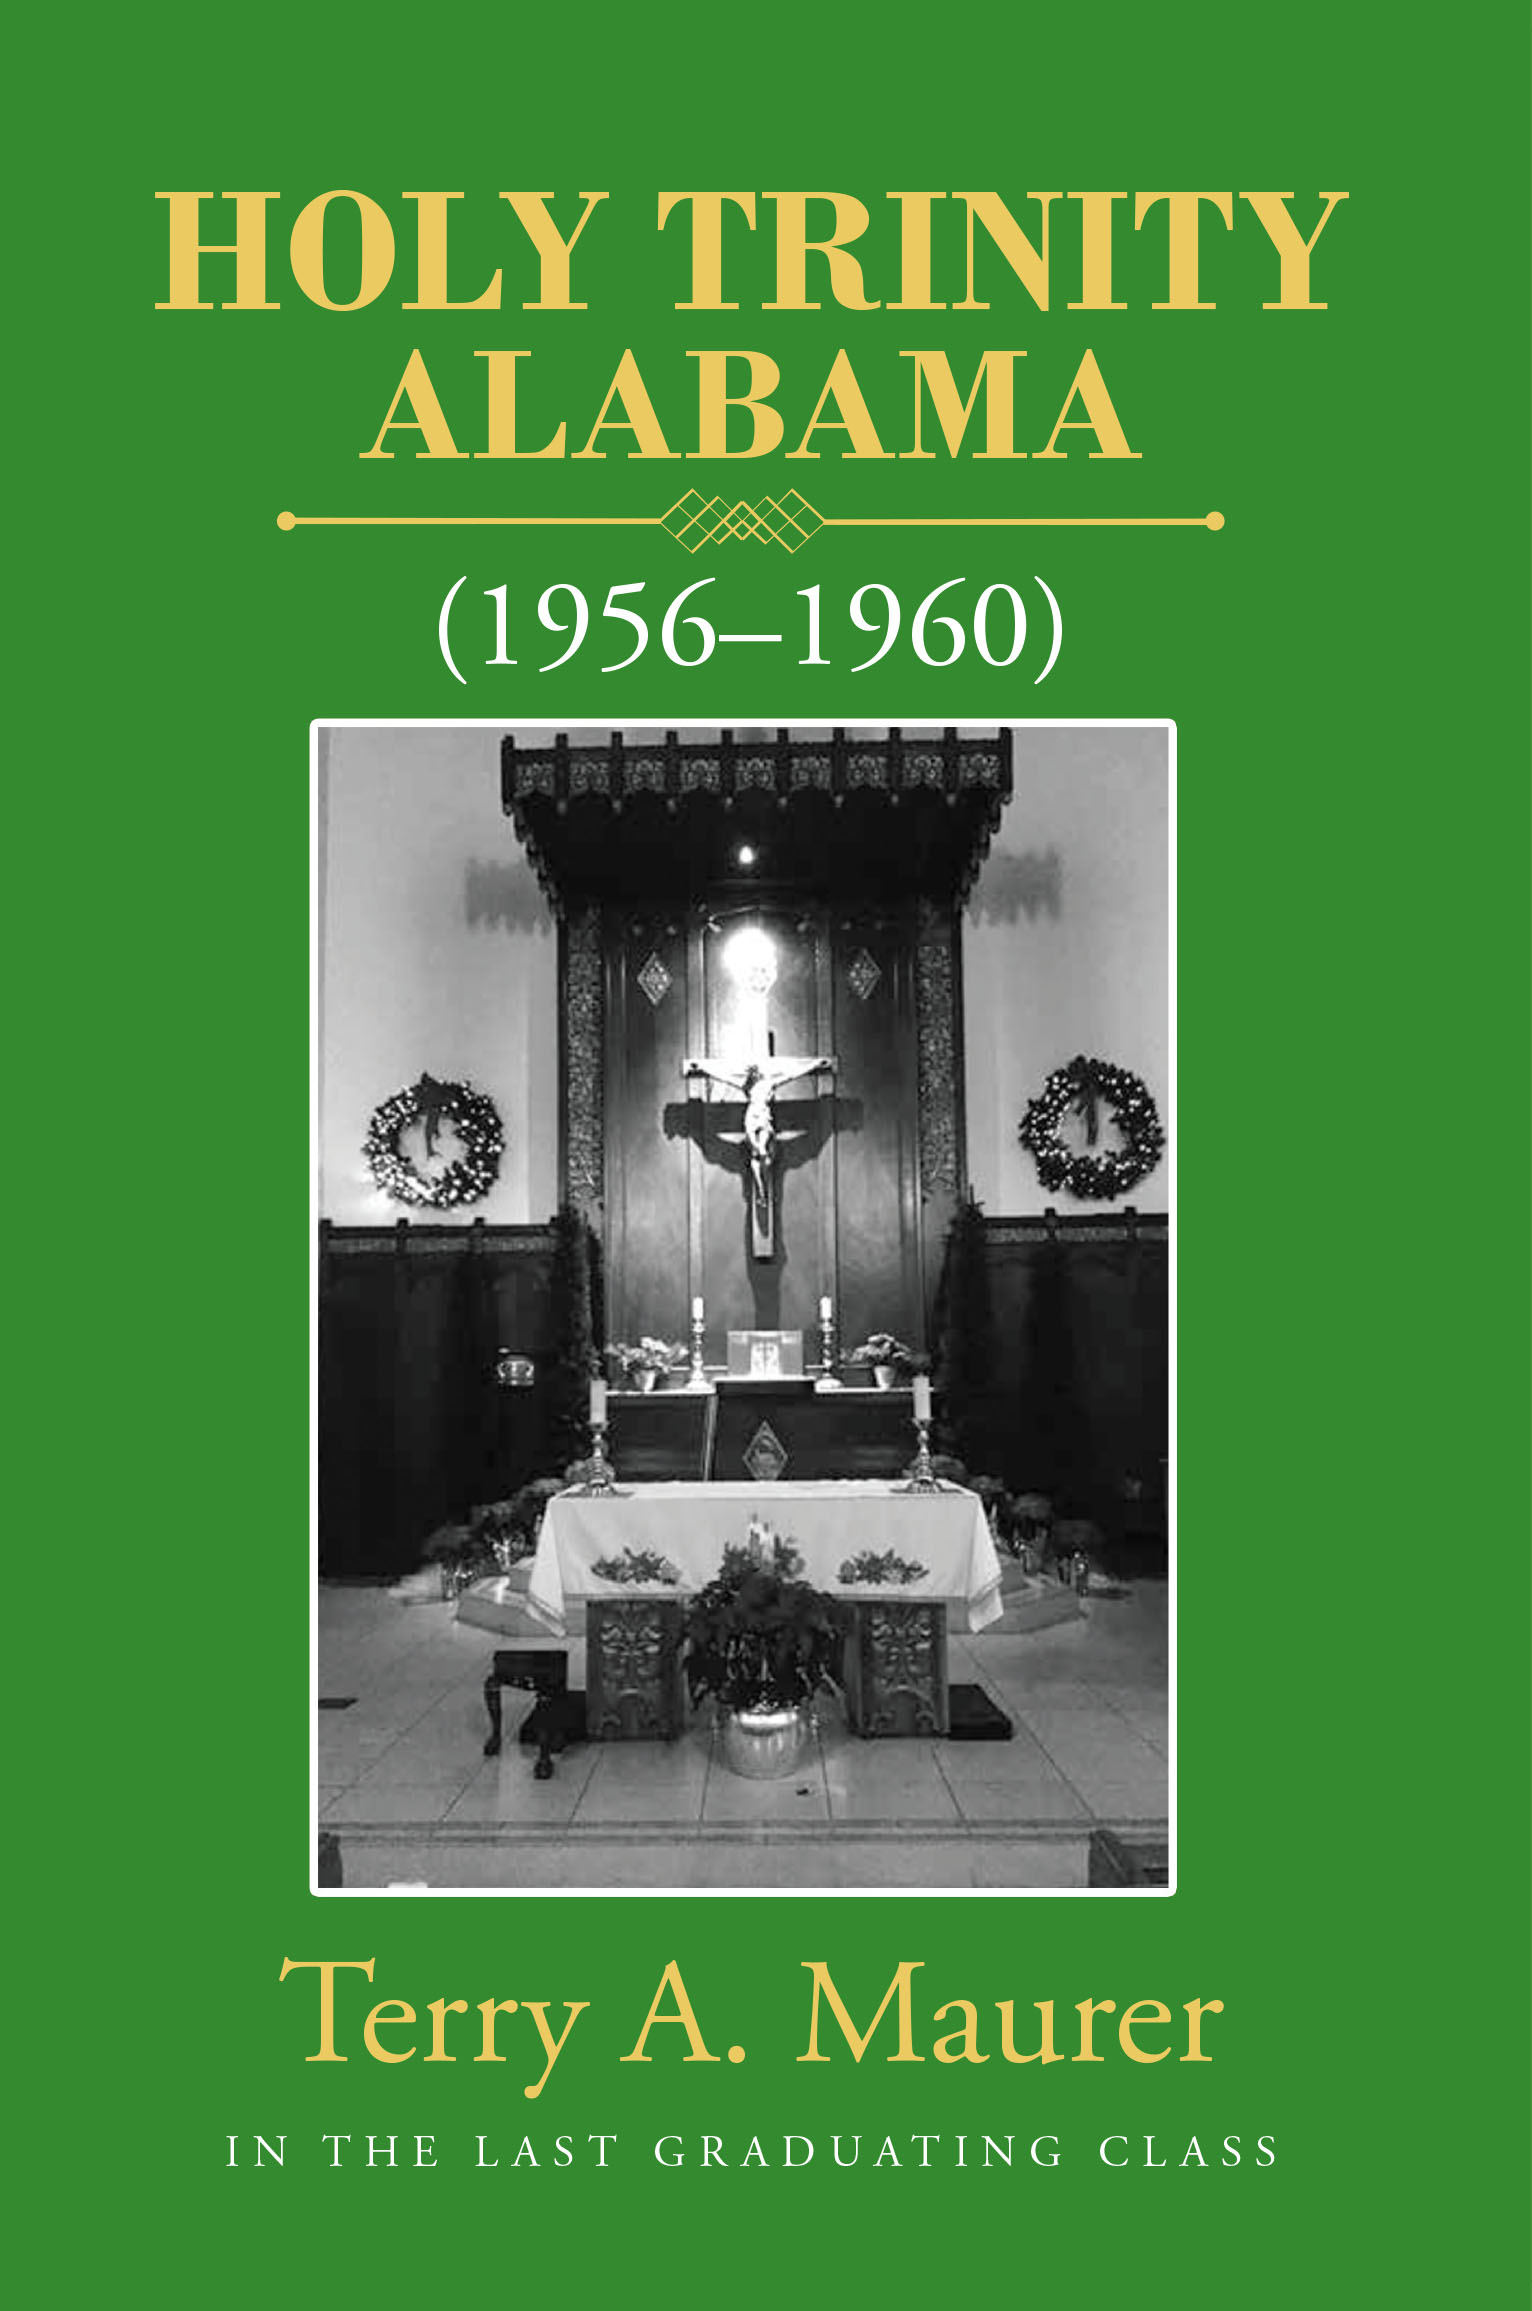 Terry A. Maurer’s New Book, "Holy Trinity, Alabama," is a Fascinating and Engaging Memoir That Tells of the Author’s Early Studies at a Catholic Seminary